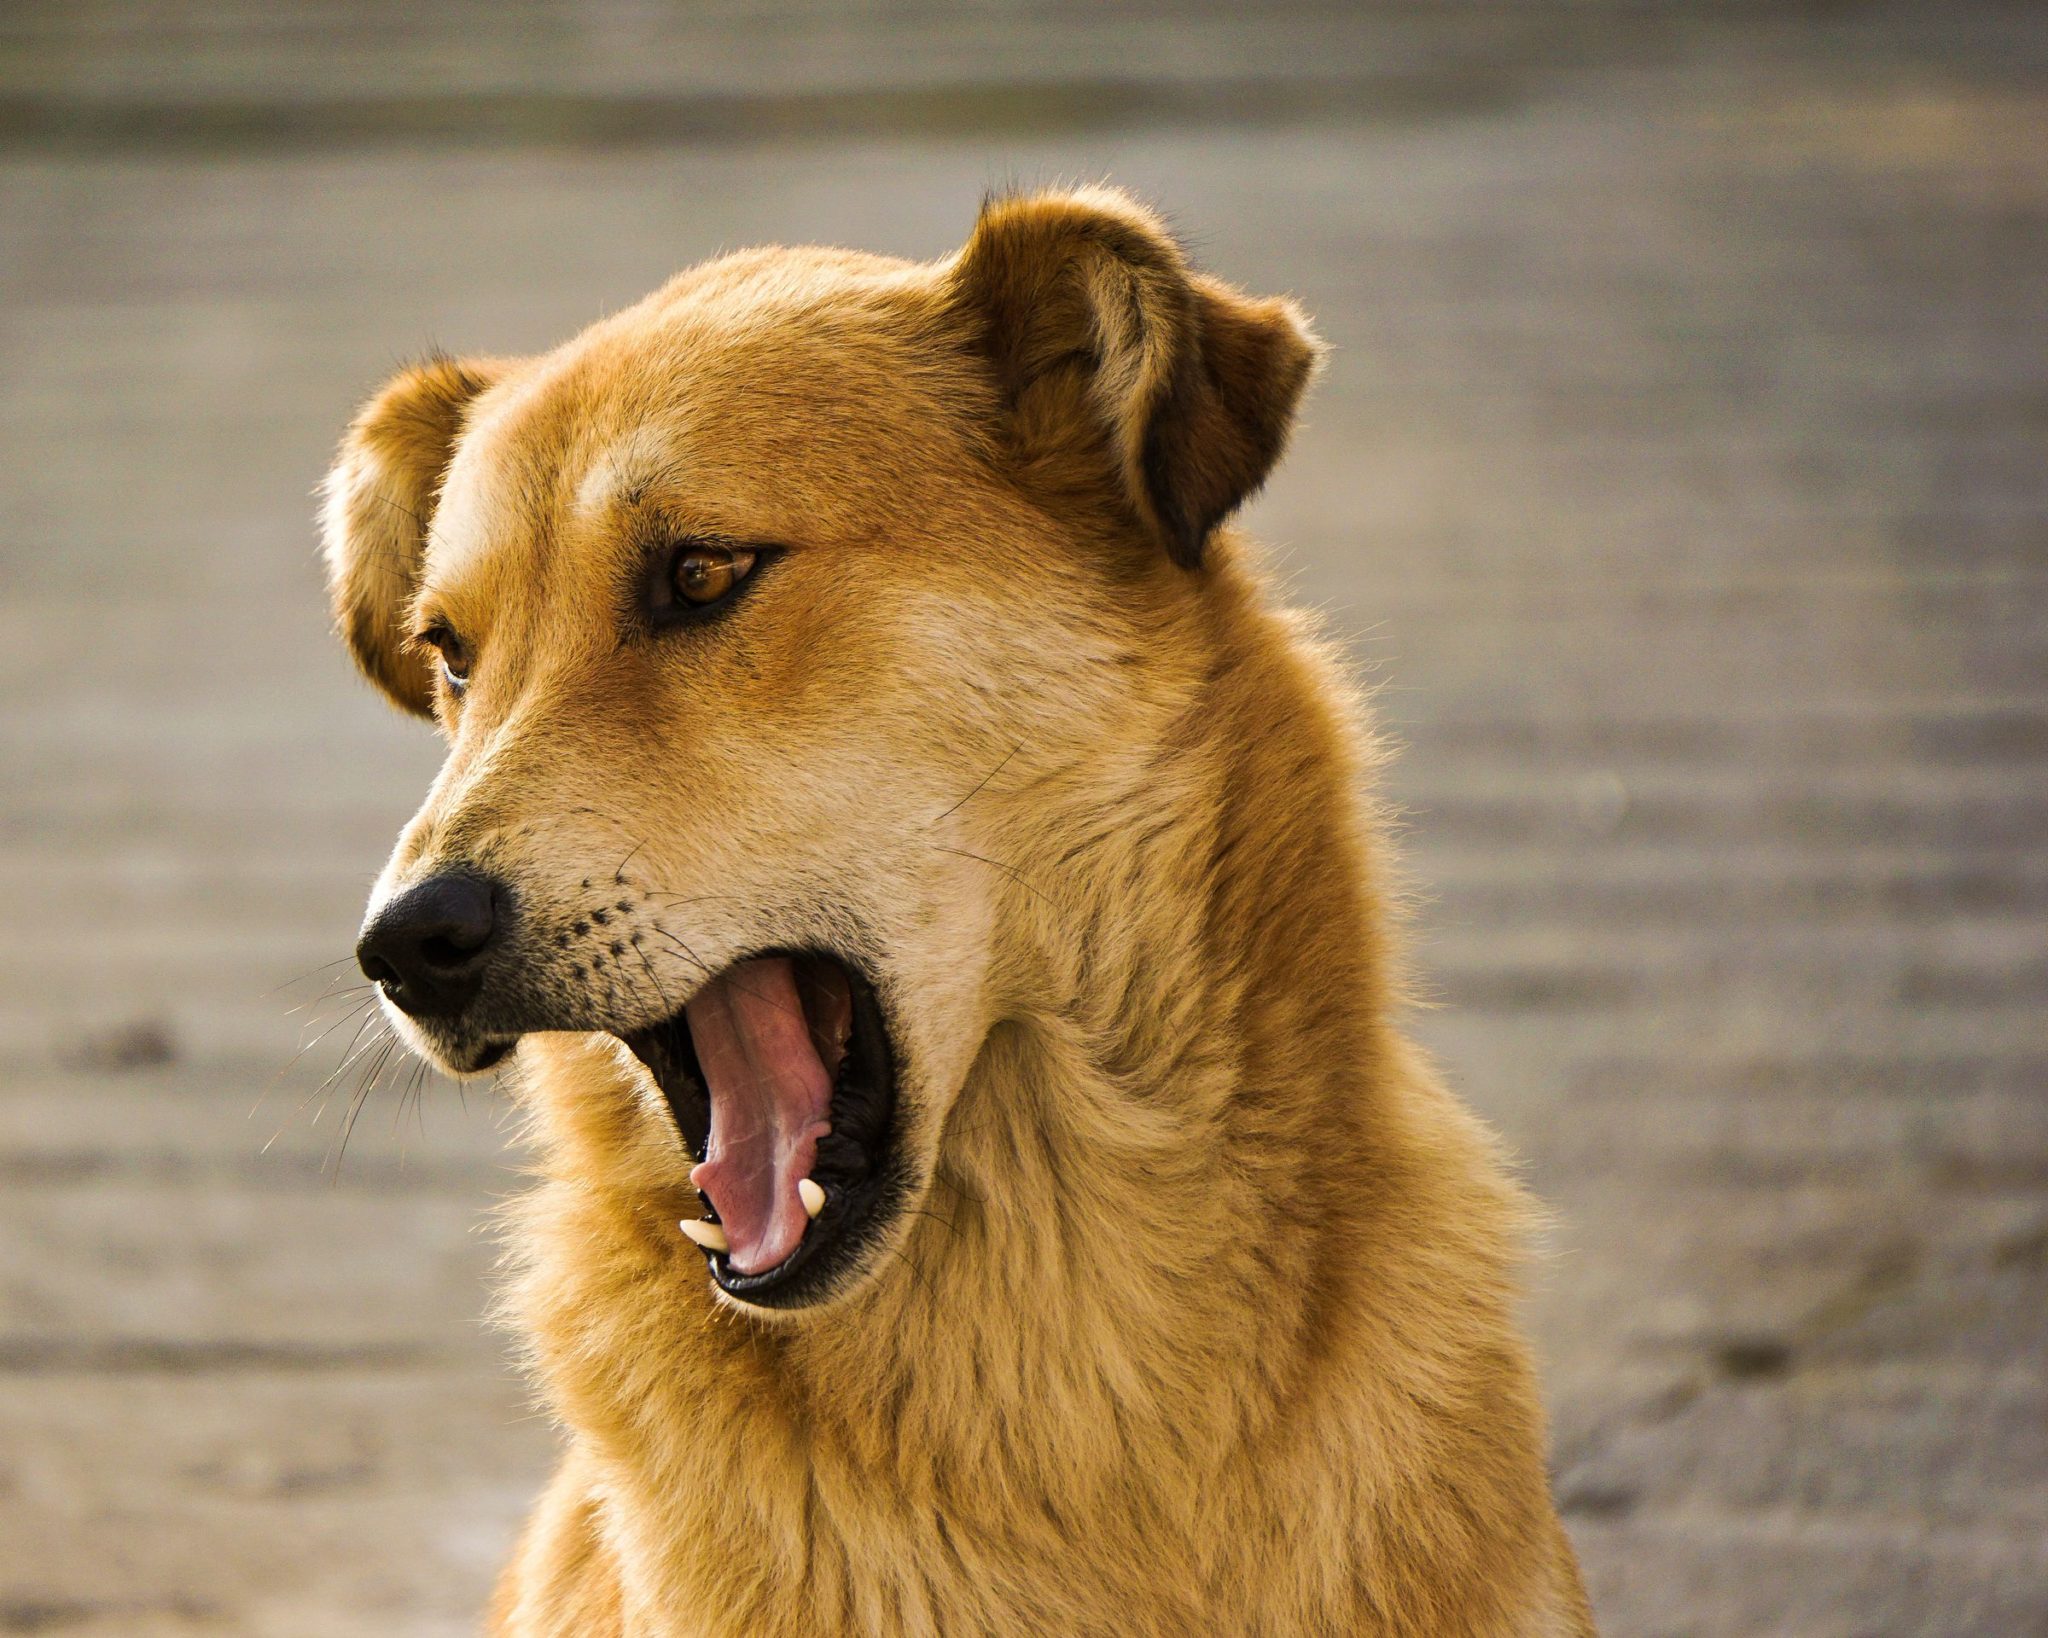 How to Calm an Aggressive Dog